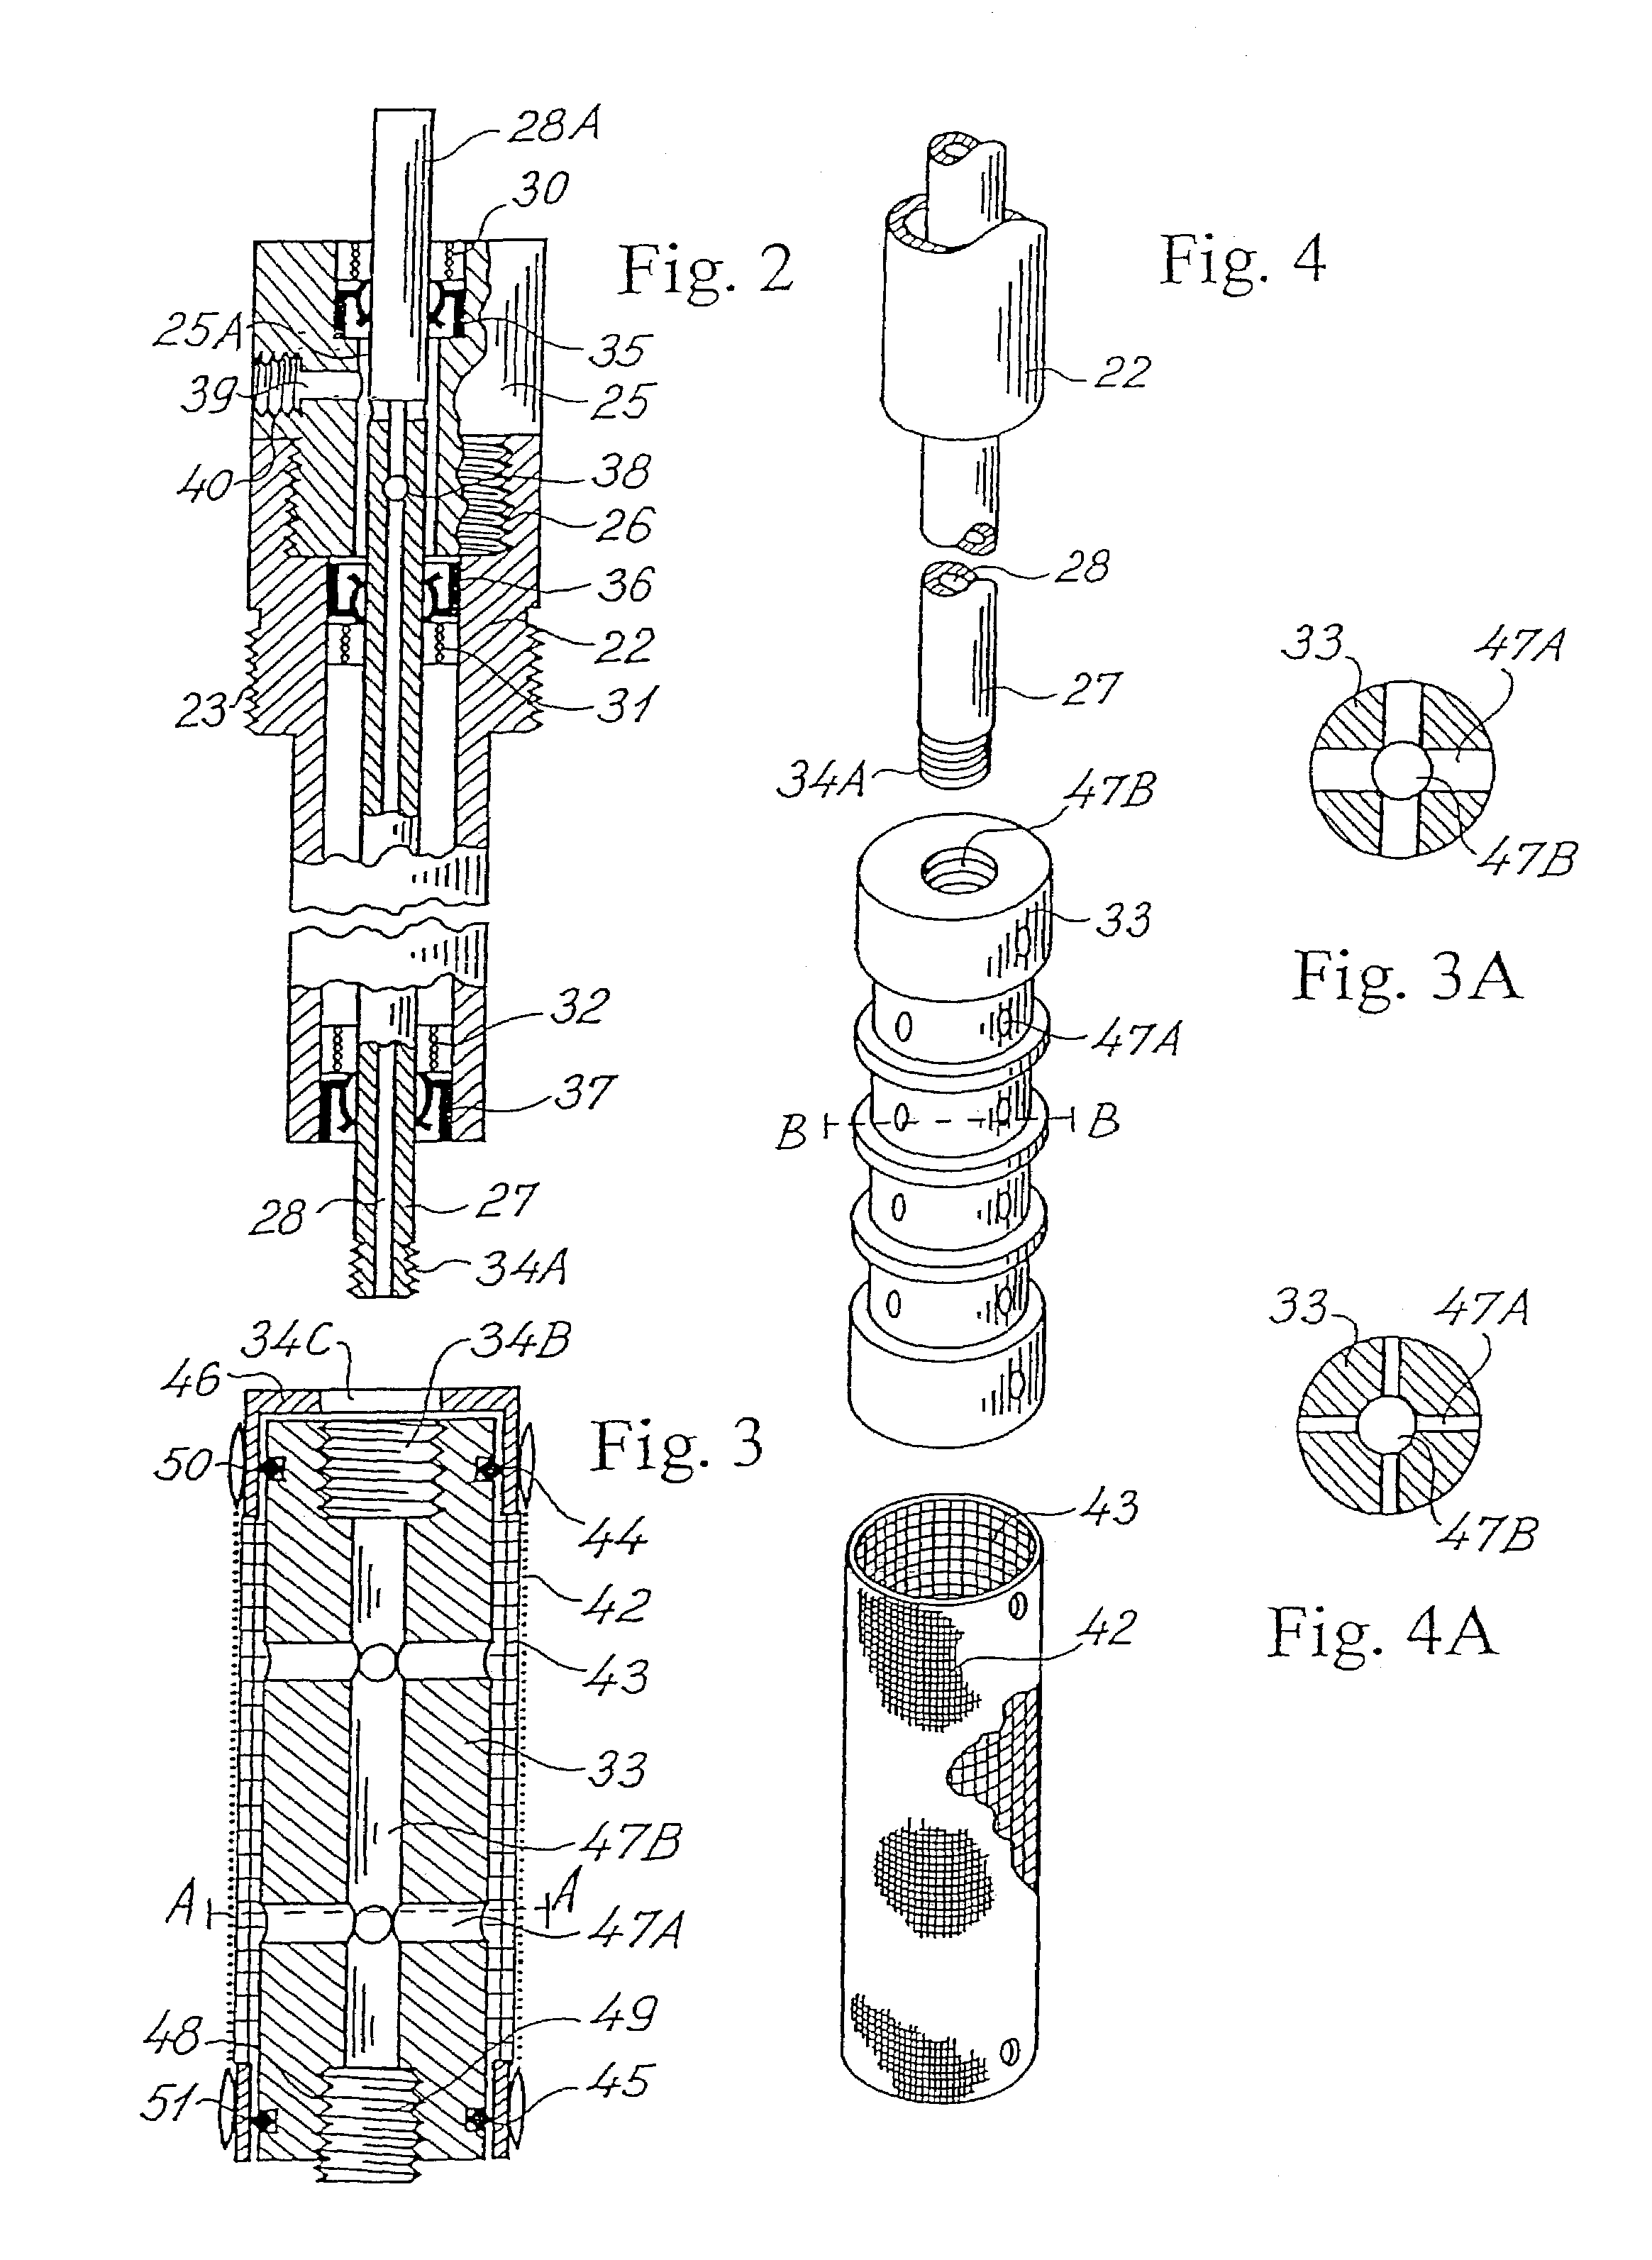 Assembly for withdrawing and filtering partial volumes of process fluid